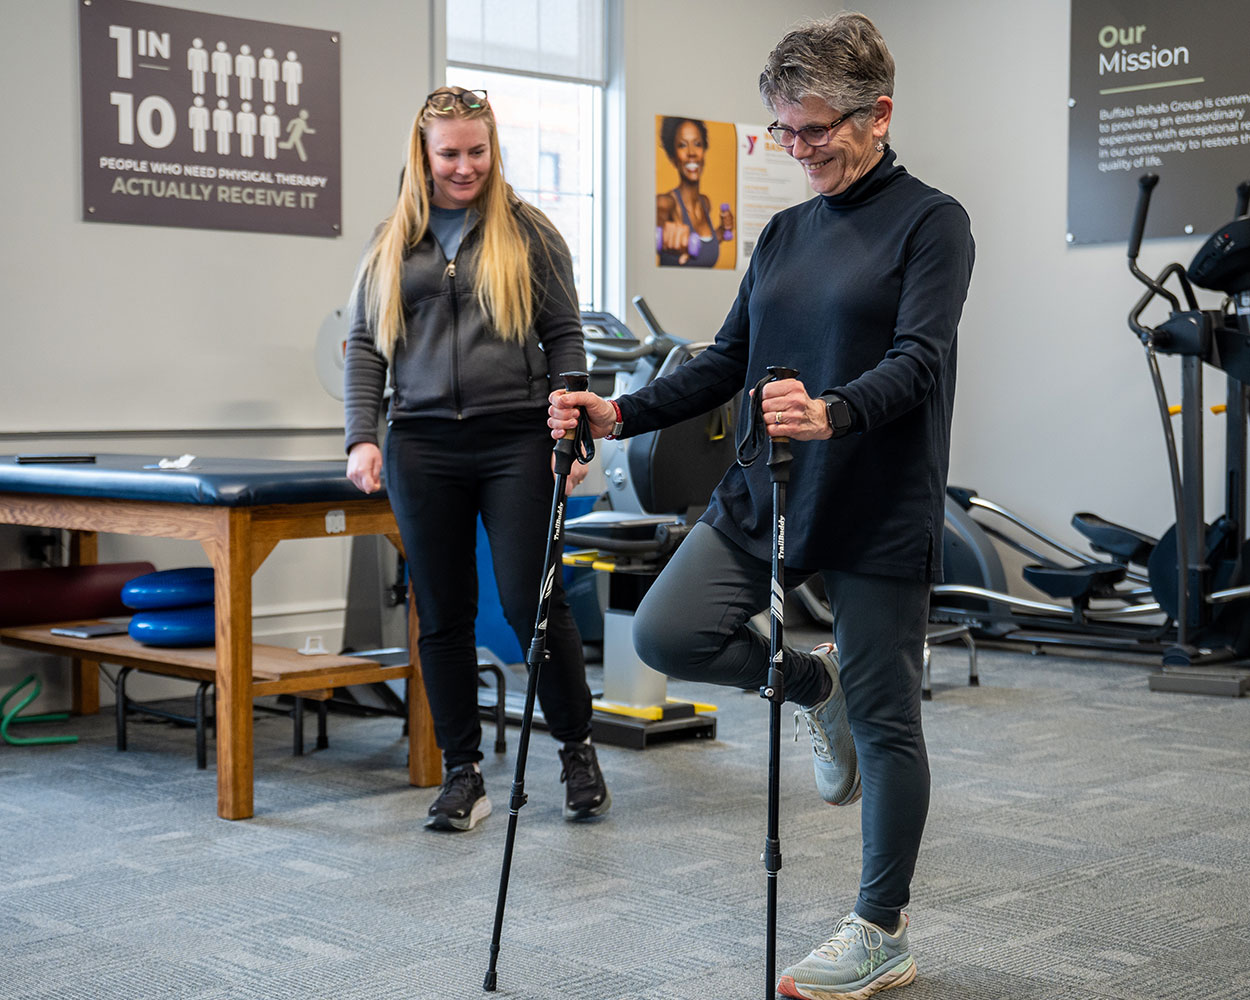 A physical therapost smiles as she watches her patient walk with the aid of crutches.